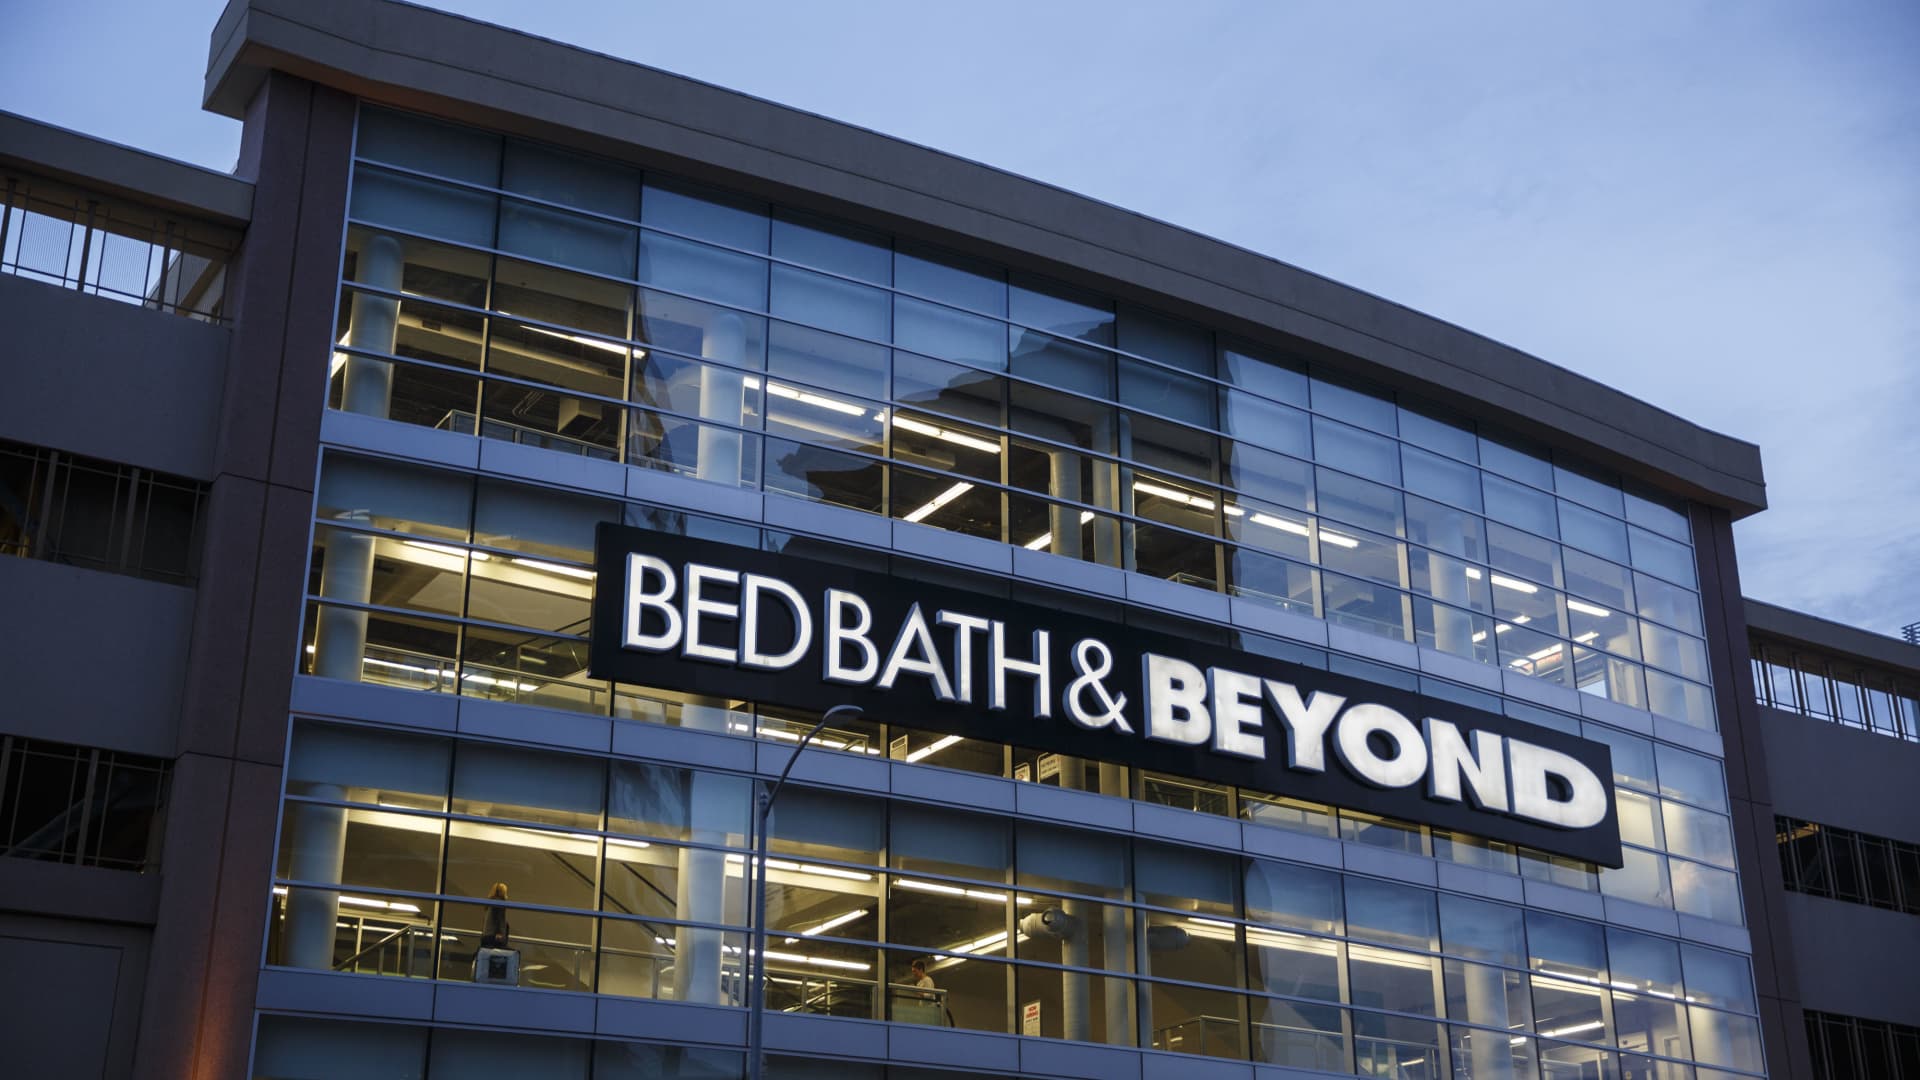 Bed Bath & Beyond says it will share its comeback strategy next week – CNBC